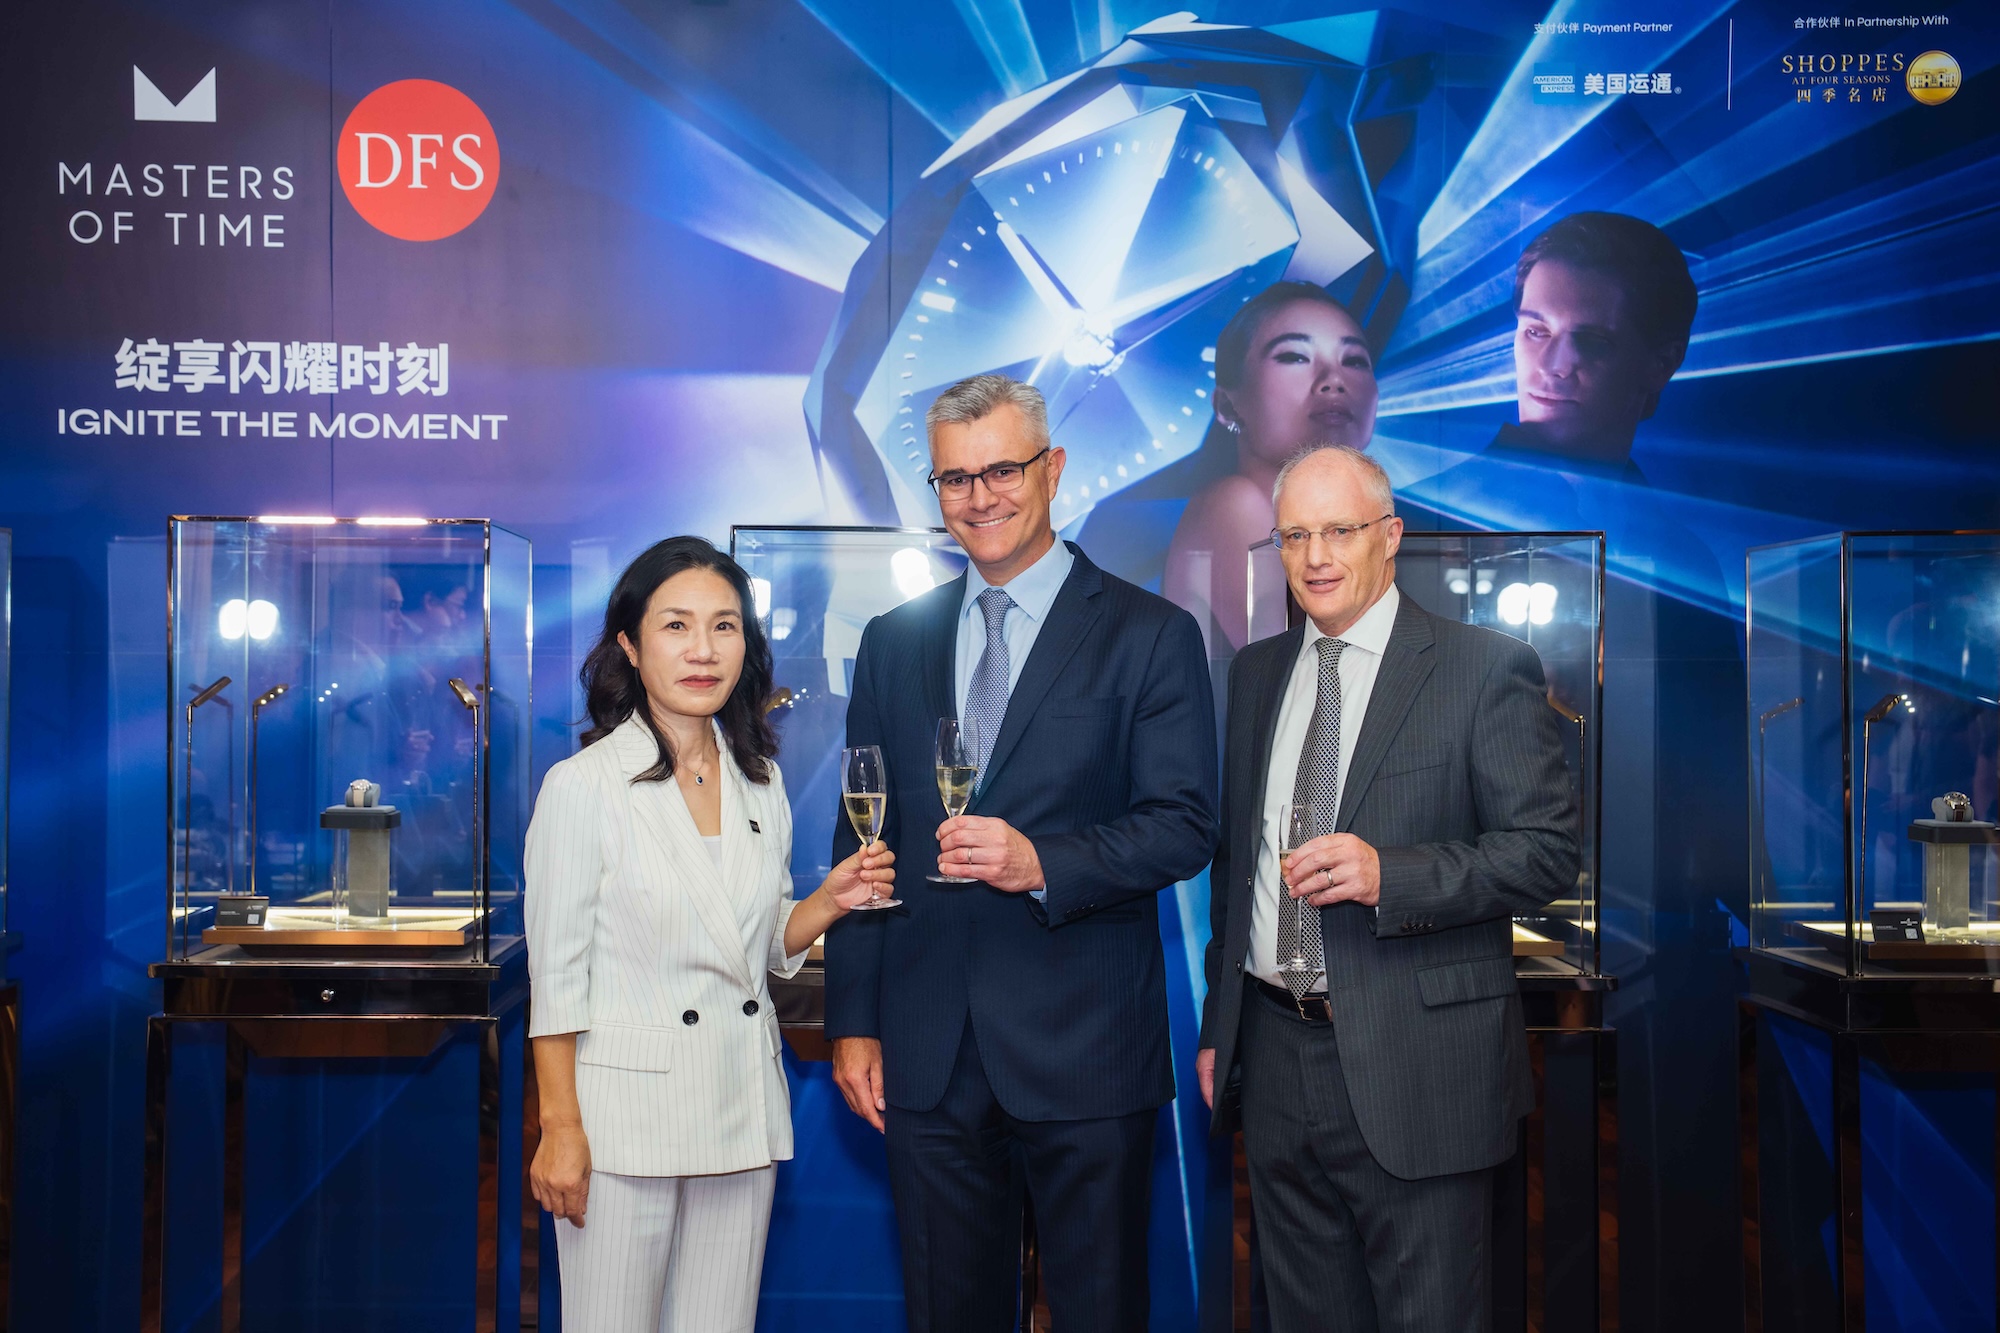 Event stakeholders including DFS’ Johan Pretorius (centre), Sands’ Timothy Jones (right) and Yamin Zhu (left), CEO of Express Company, American Express’ joint venture, mingled with fellow watch enthusiasts and fine jewellery collectors for the dazzling event